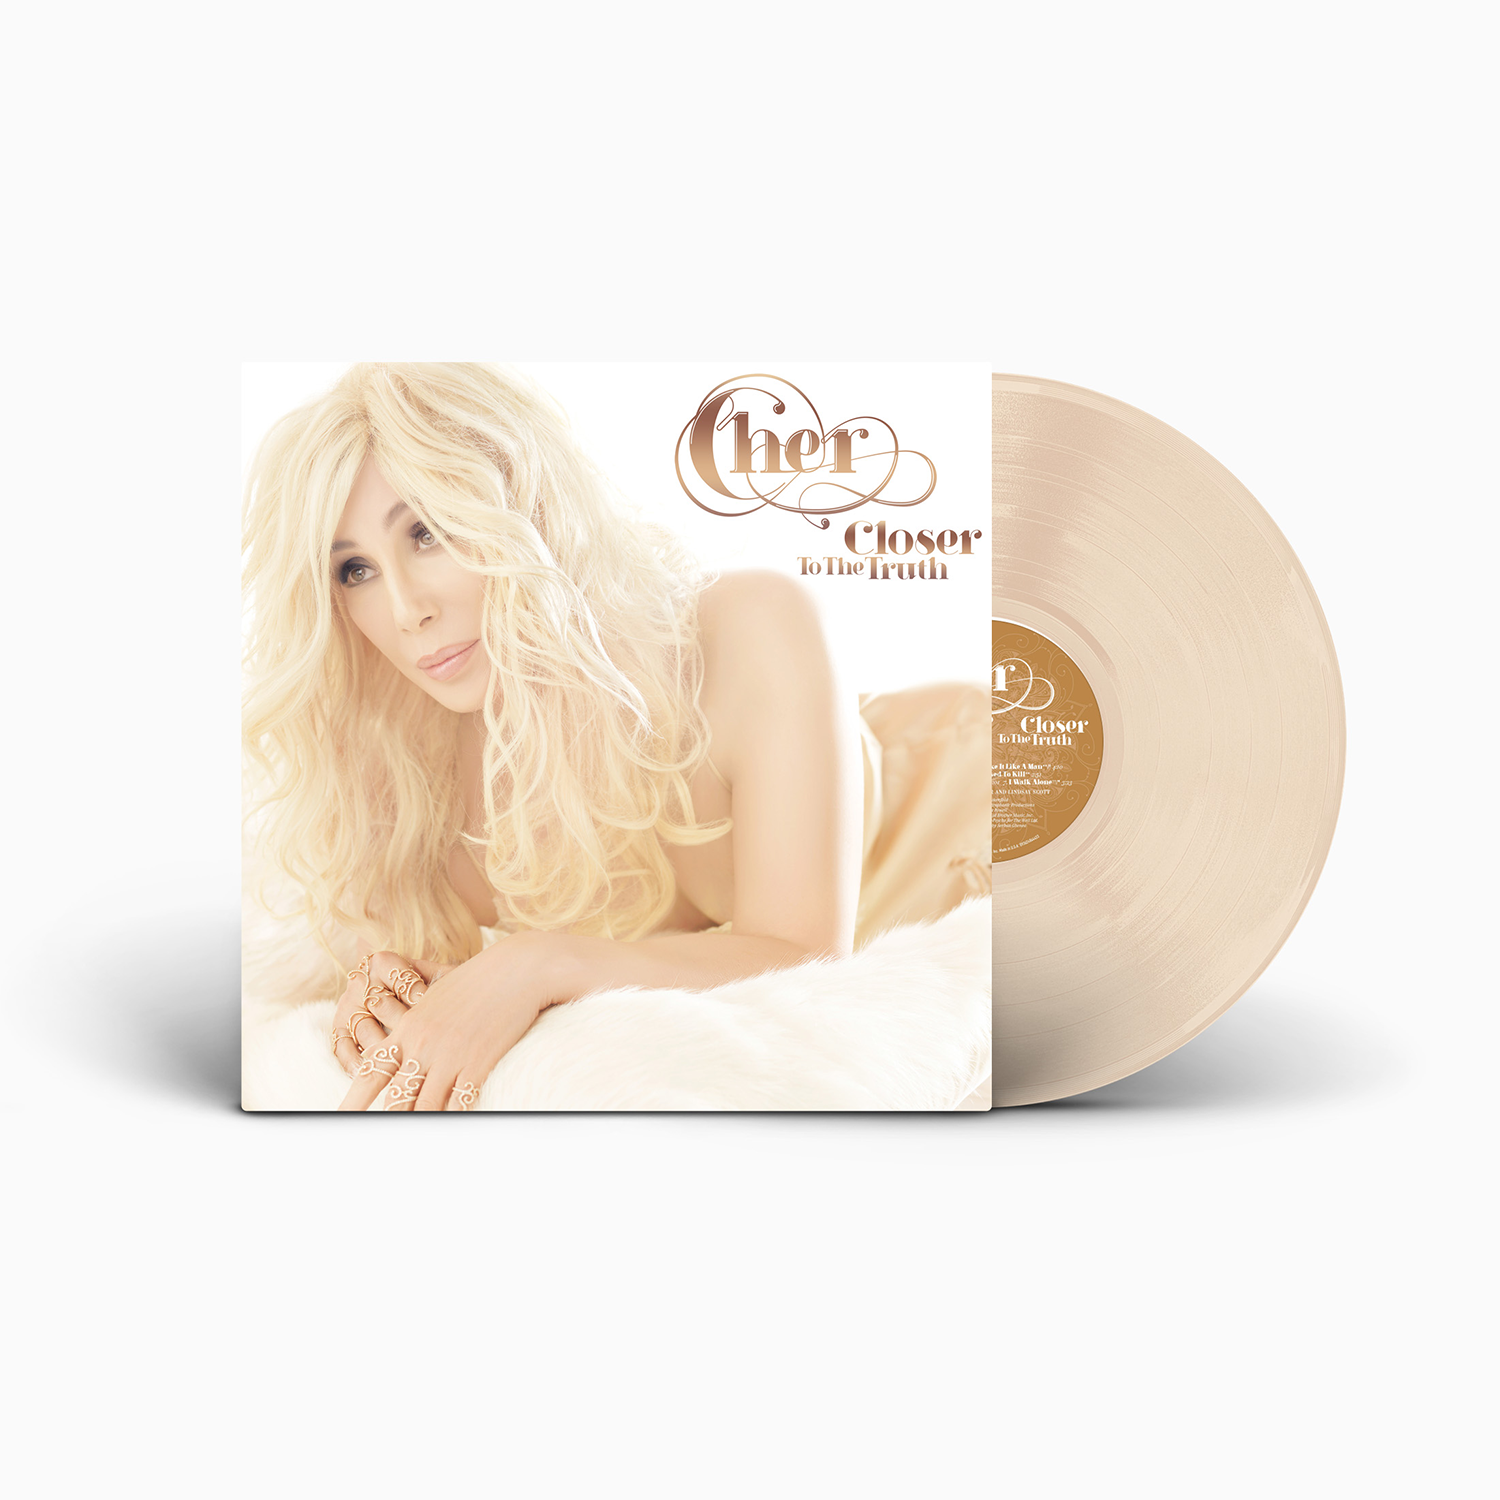 Cher - Closer To The Truth: Limited Bone Vinyl LP